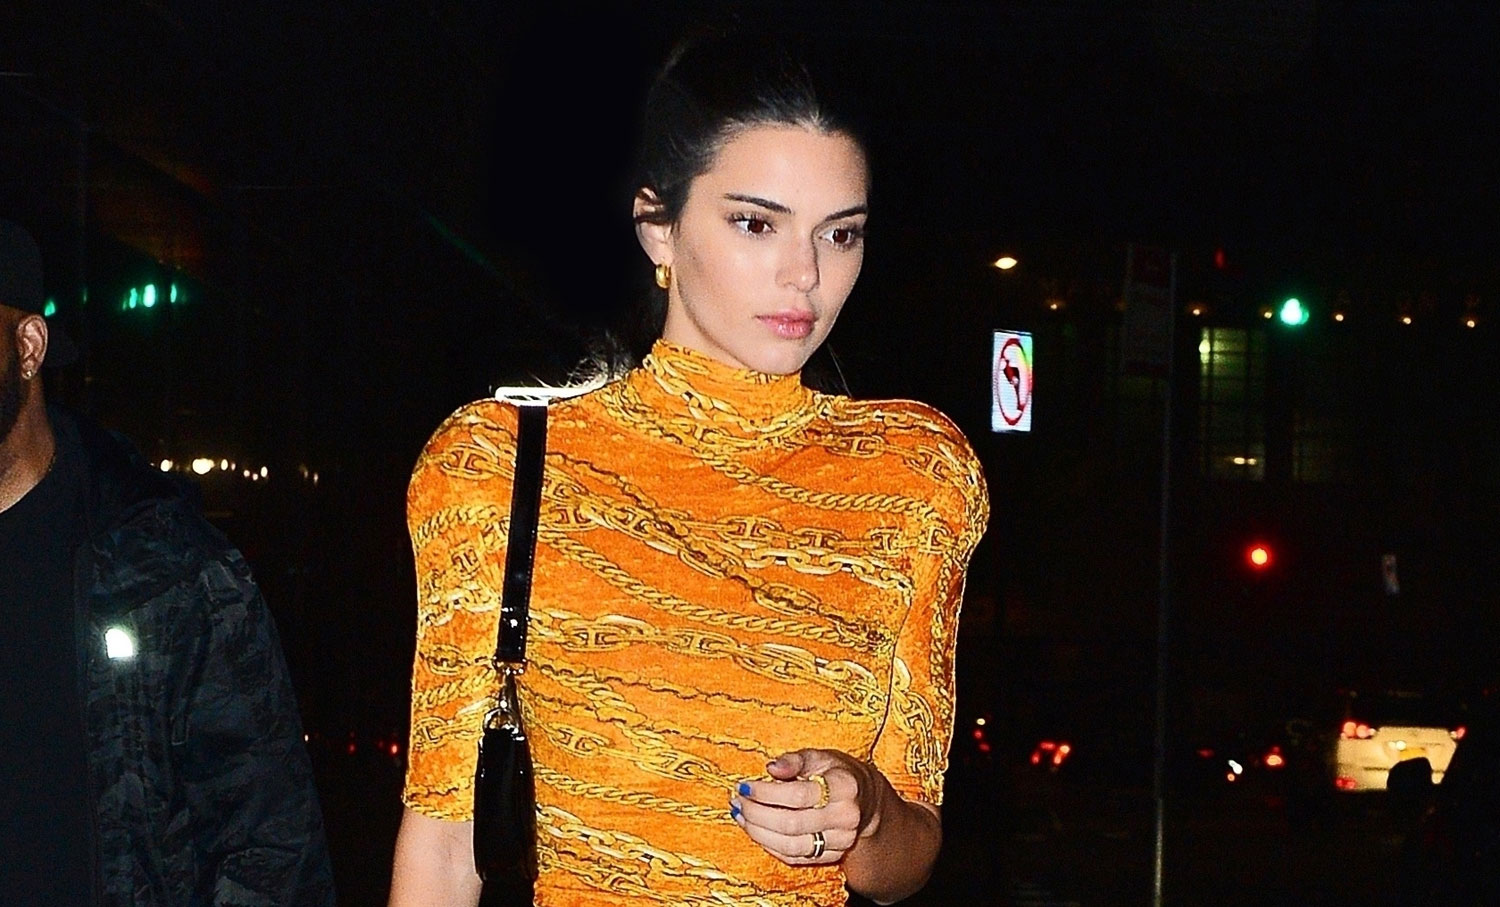 Kendall Jenner Is Looking Chic Ahead of the Met Gala! | Kendall Jenner ...